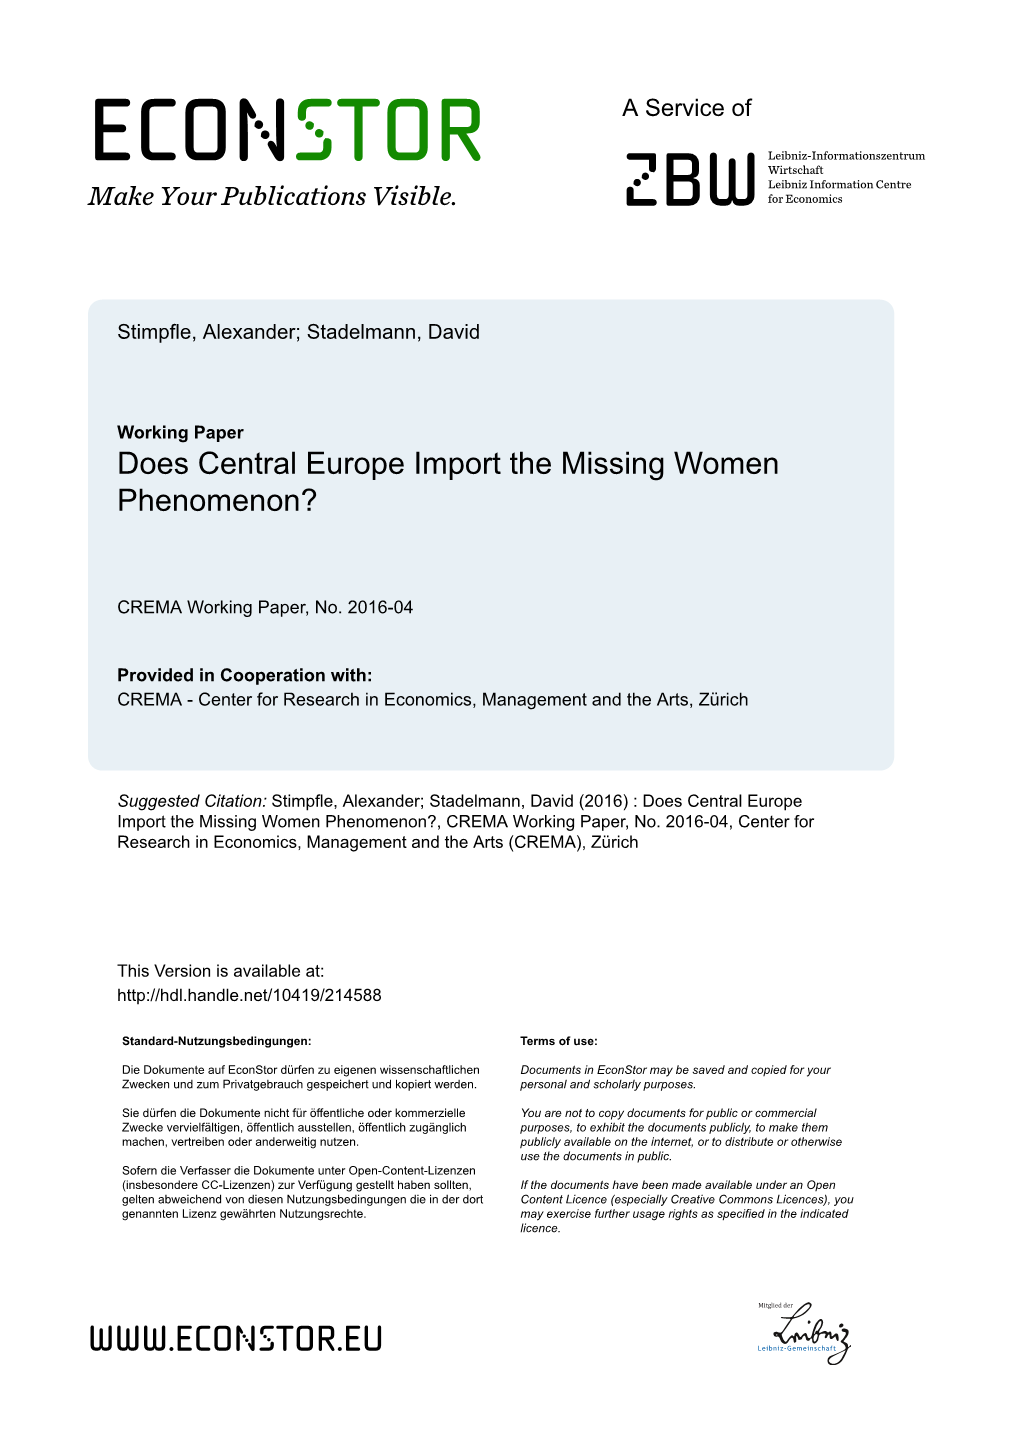 Does Central Europe Import the Missing Women Phenomenon?